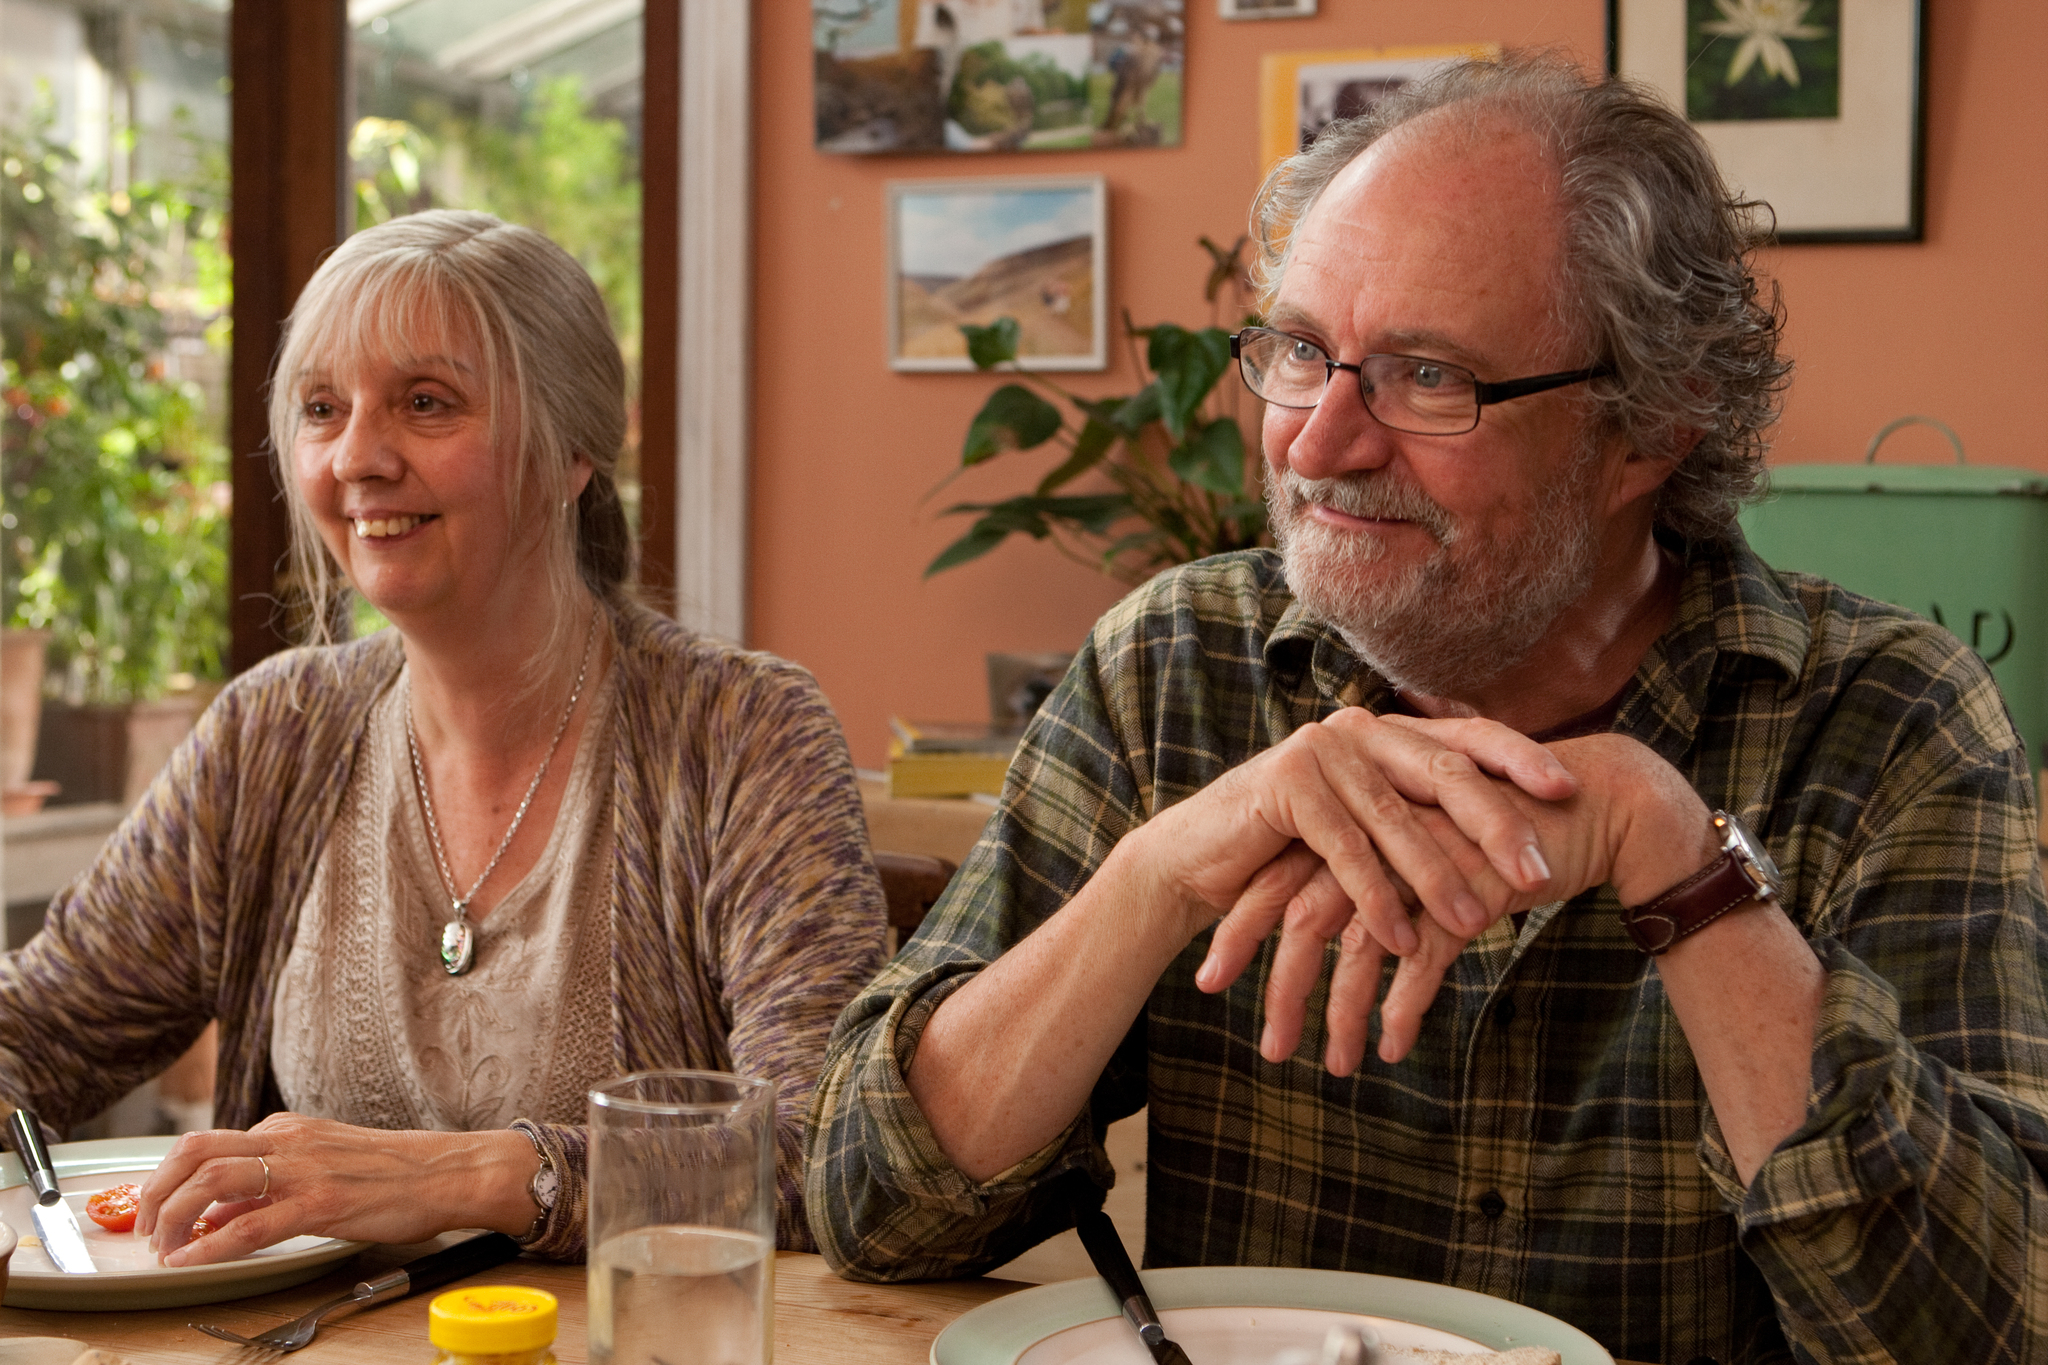 Still of Jim Broadbent and Ruth Sheen in Another Year (2010)